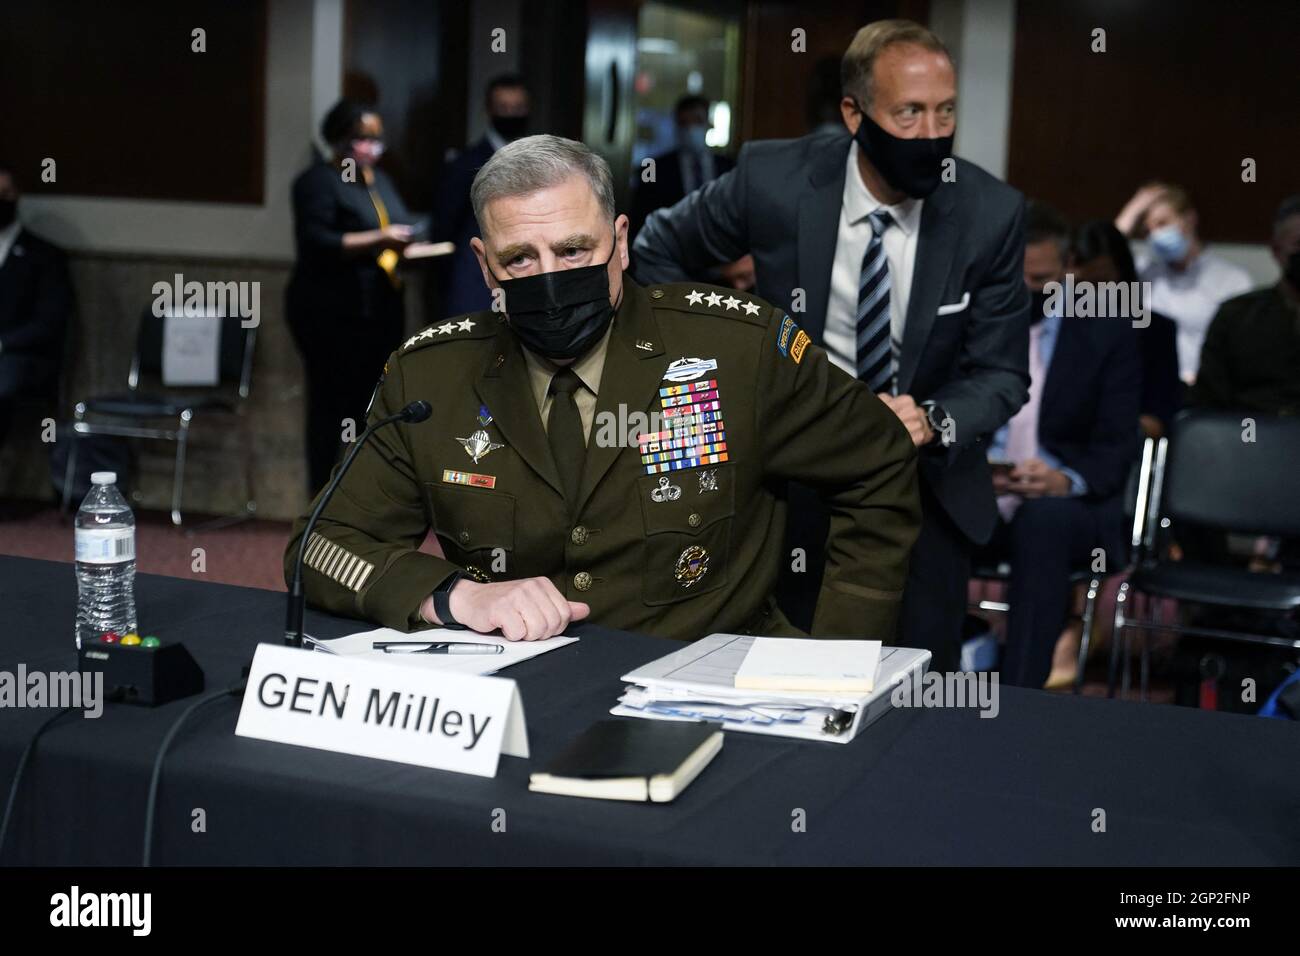 Chairman of the Joint Chiefs of Staff Gen. Mark Milley arrives before a Senate Armed Services Committee hearing on the conclusion of military operations in Afghanistan and plans for future counterterrorism operations, Tuesday, Sept. 28, 2021, on Capitol Hill in Washington. Photo by Patrick Semansky/Pool/ABACAPRESS.COM Stock Photo